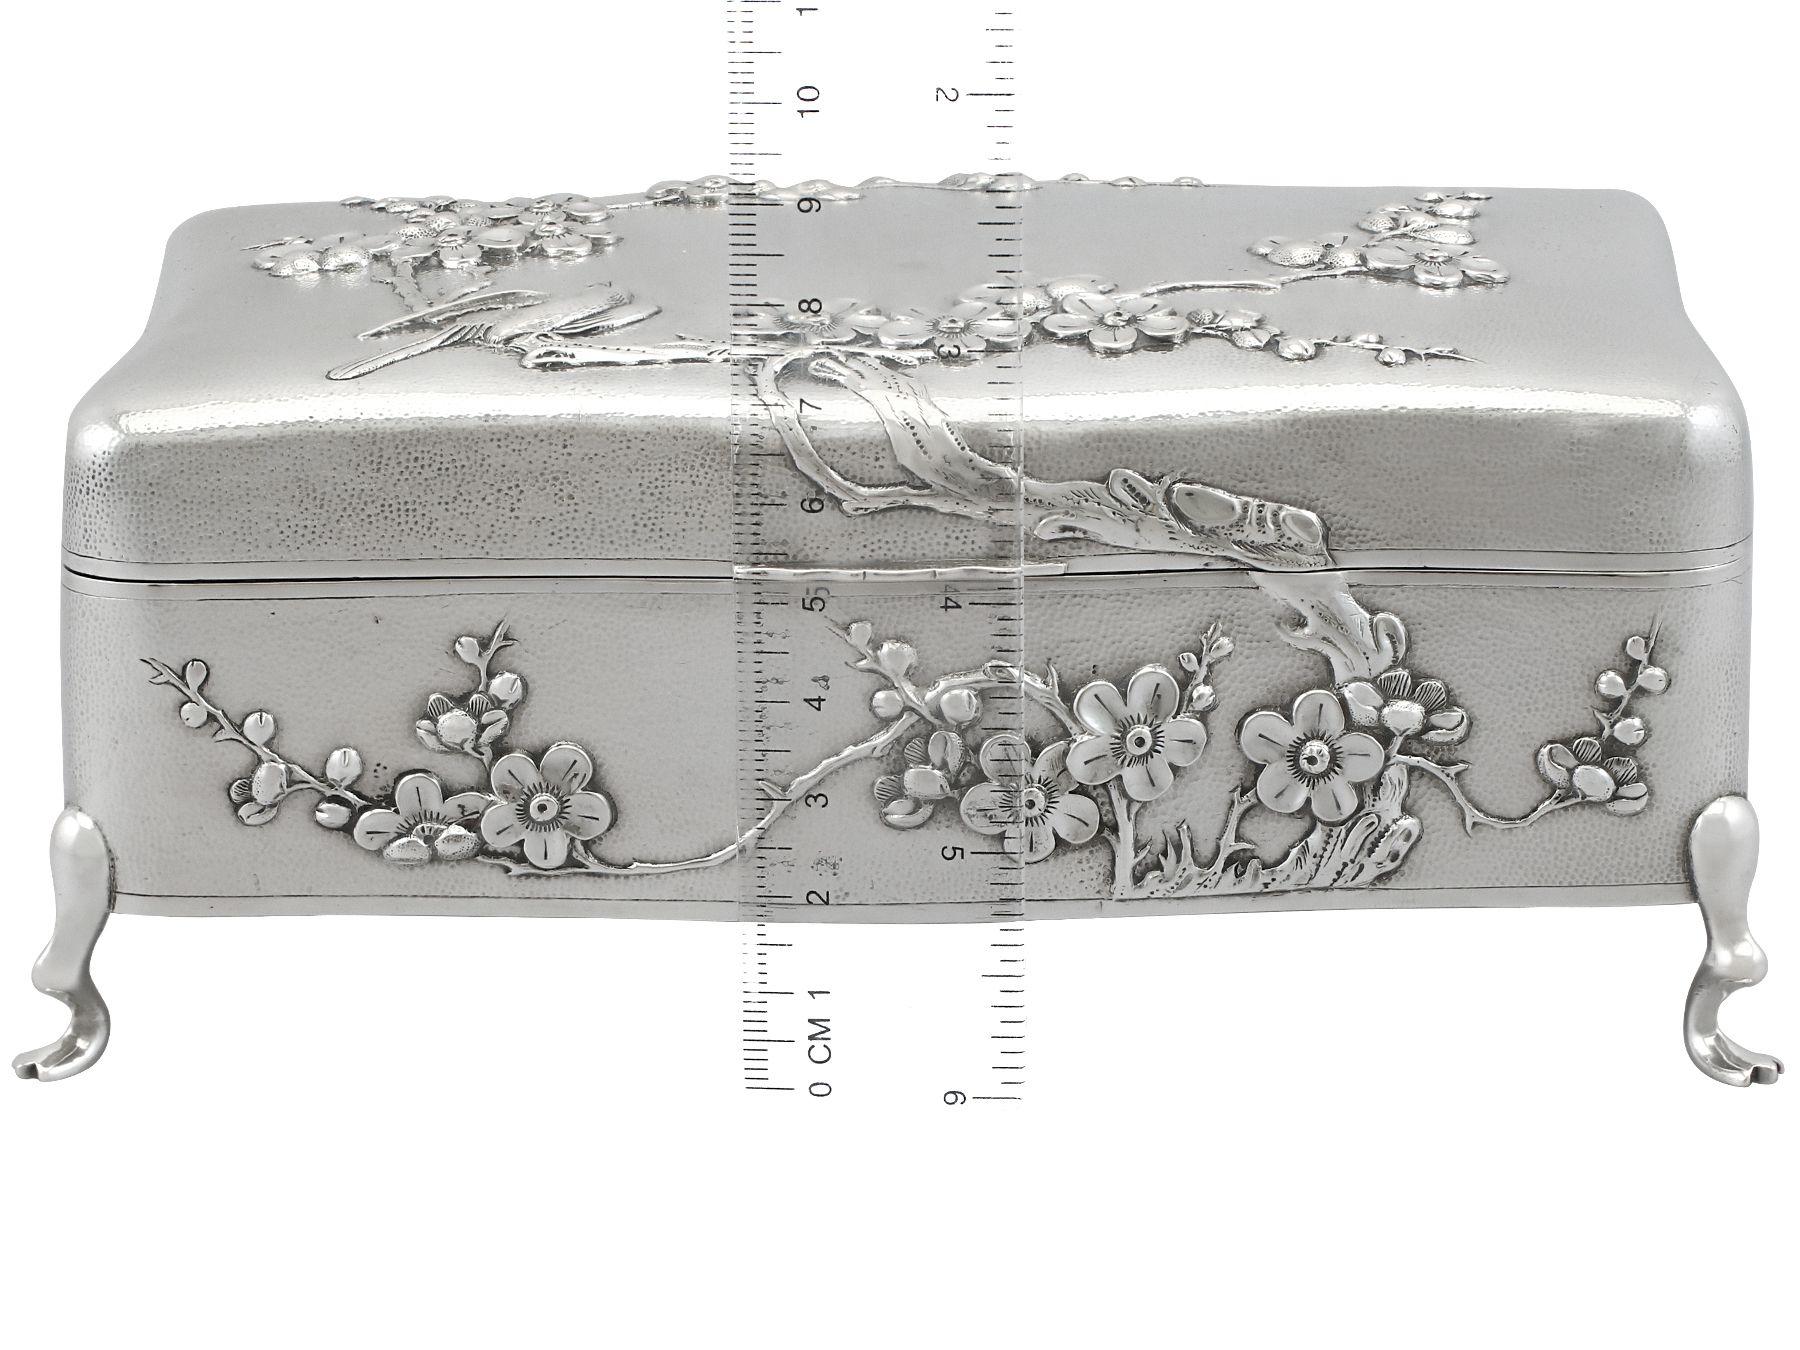 Antique Chinese Export Silver Jewellery Box, circa 1895 For Sale 2